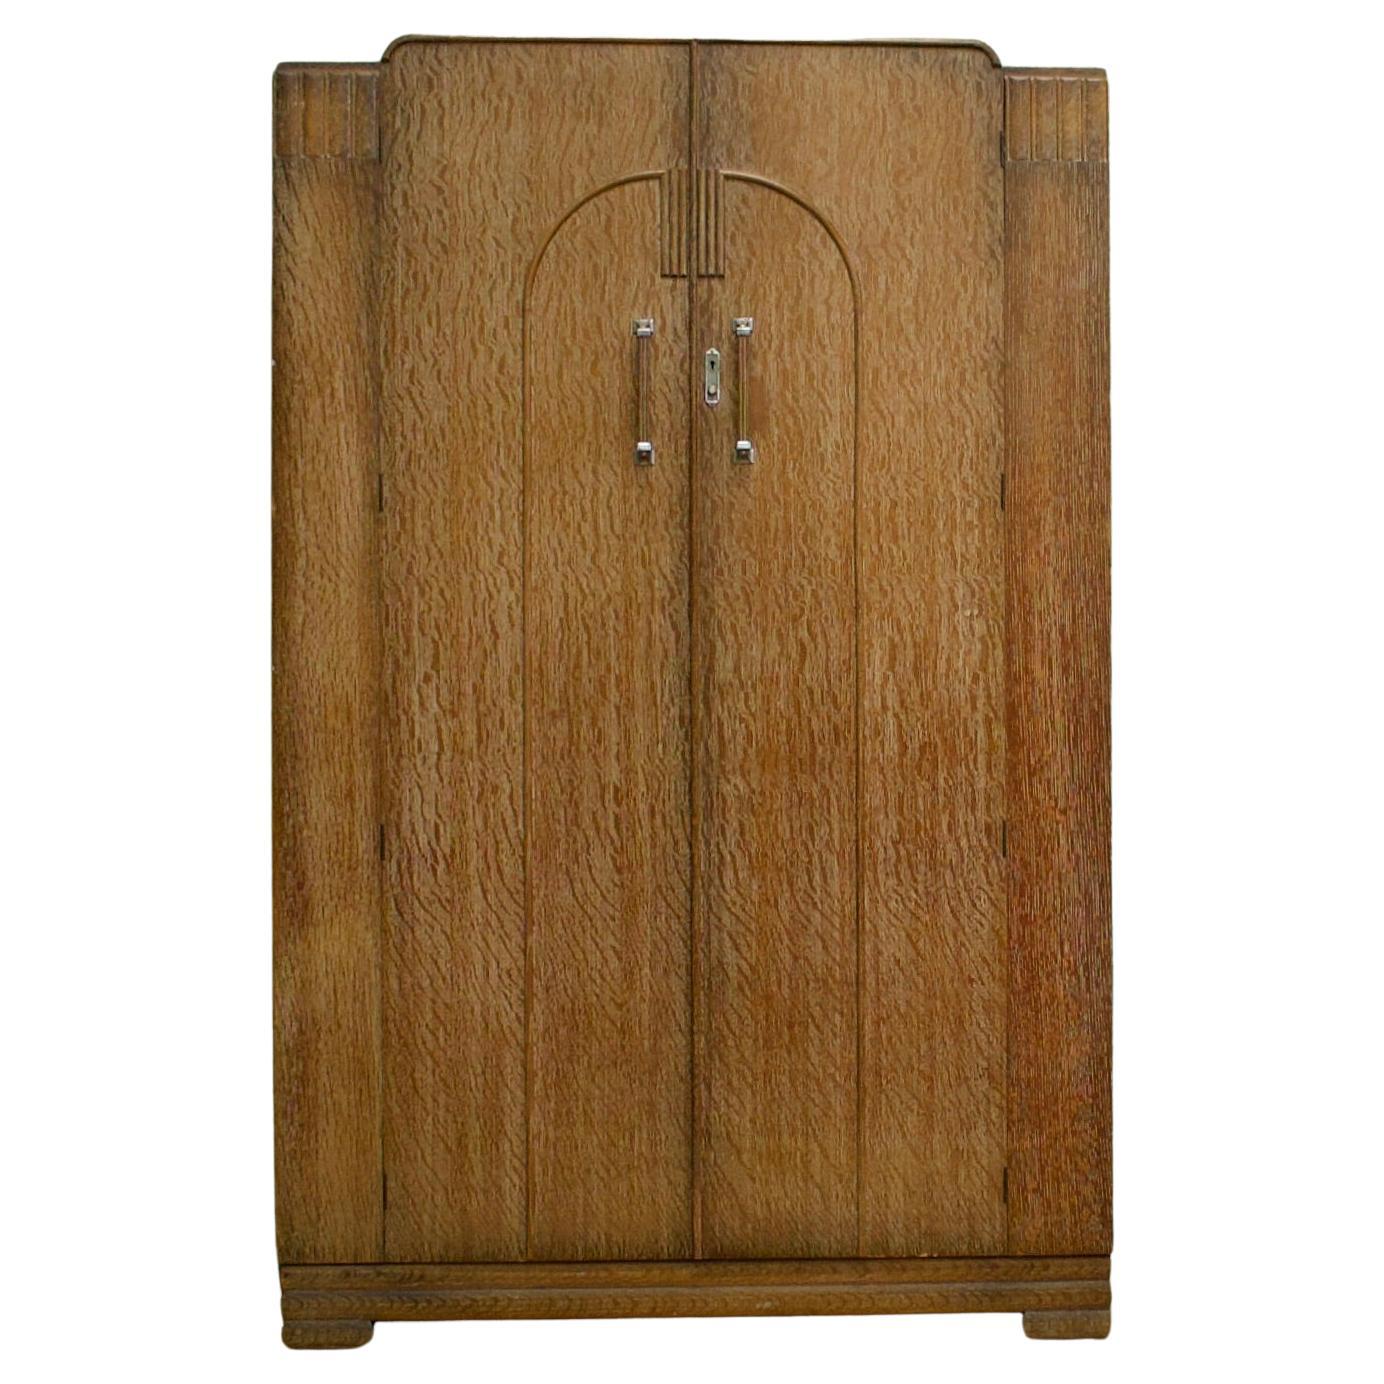 British Vintage Art Deco Limed Oak Wardrobe from Maple and Co, 1930s